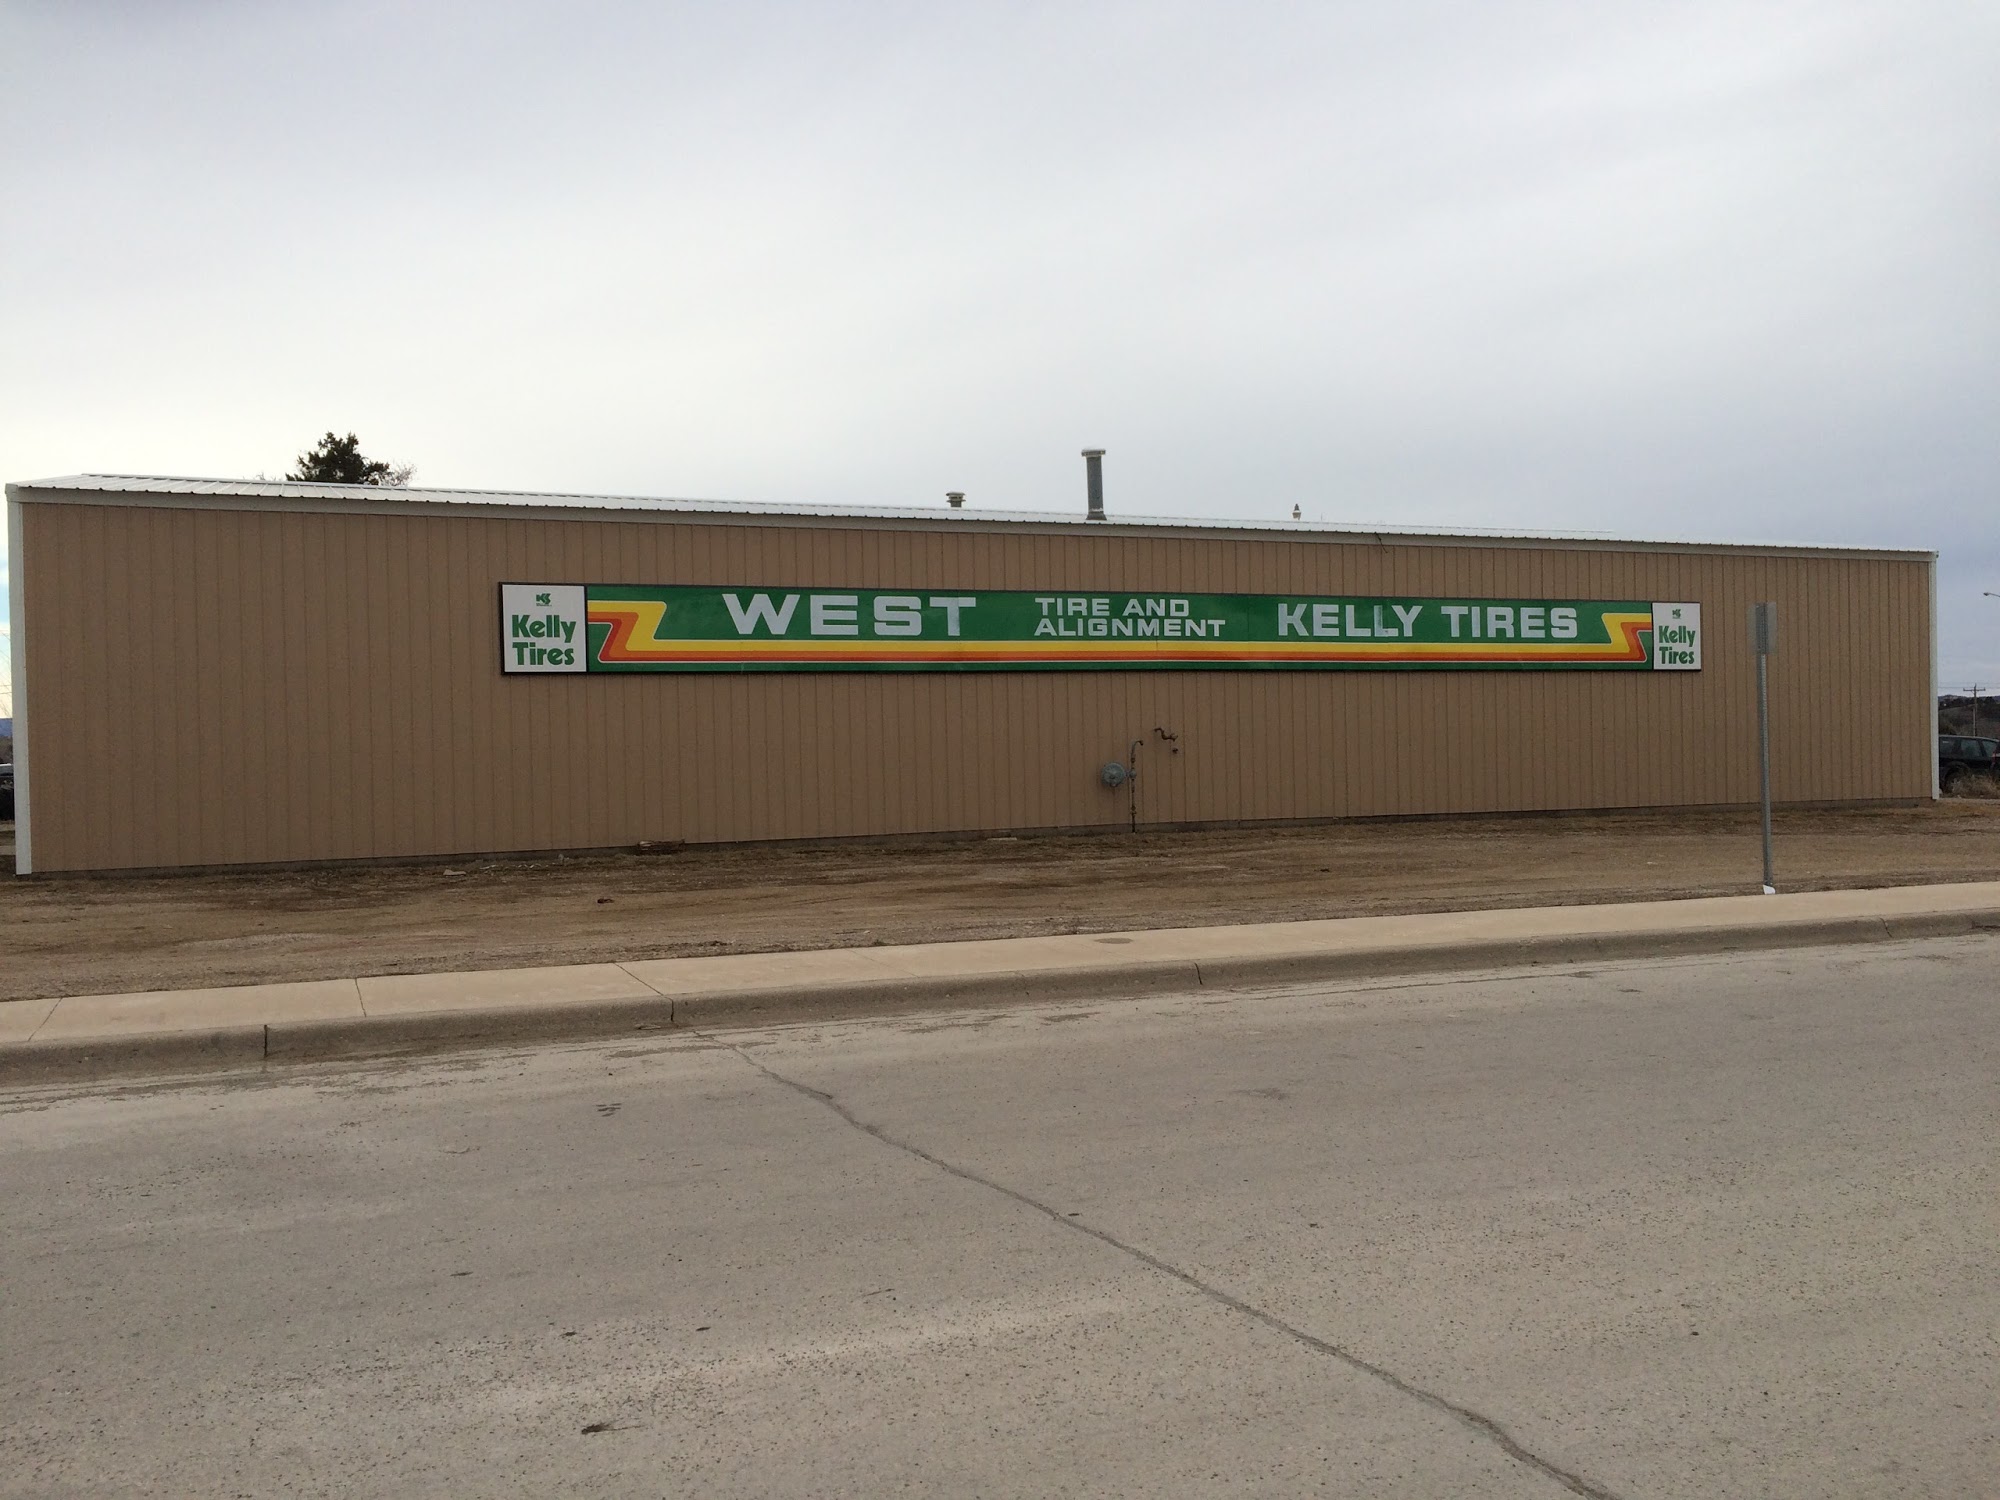 West Tire & Alignment Co